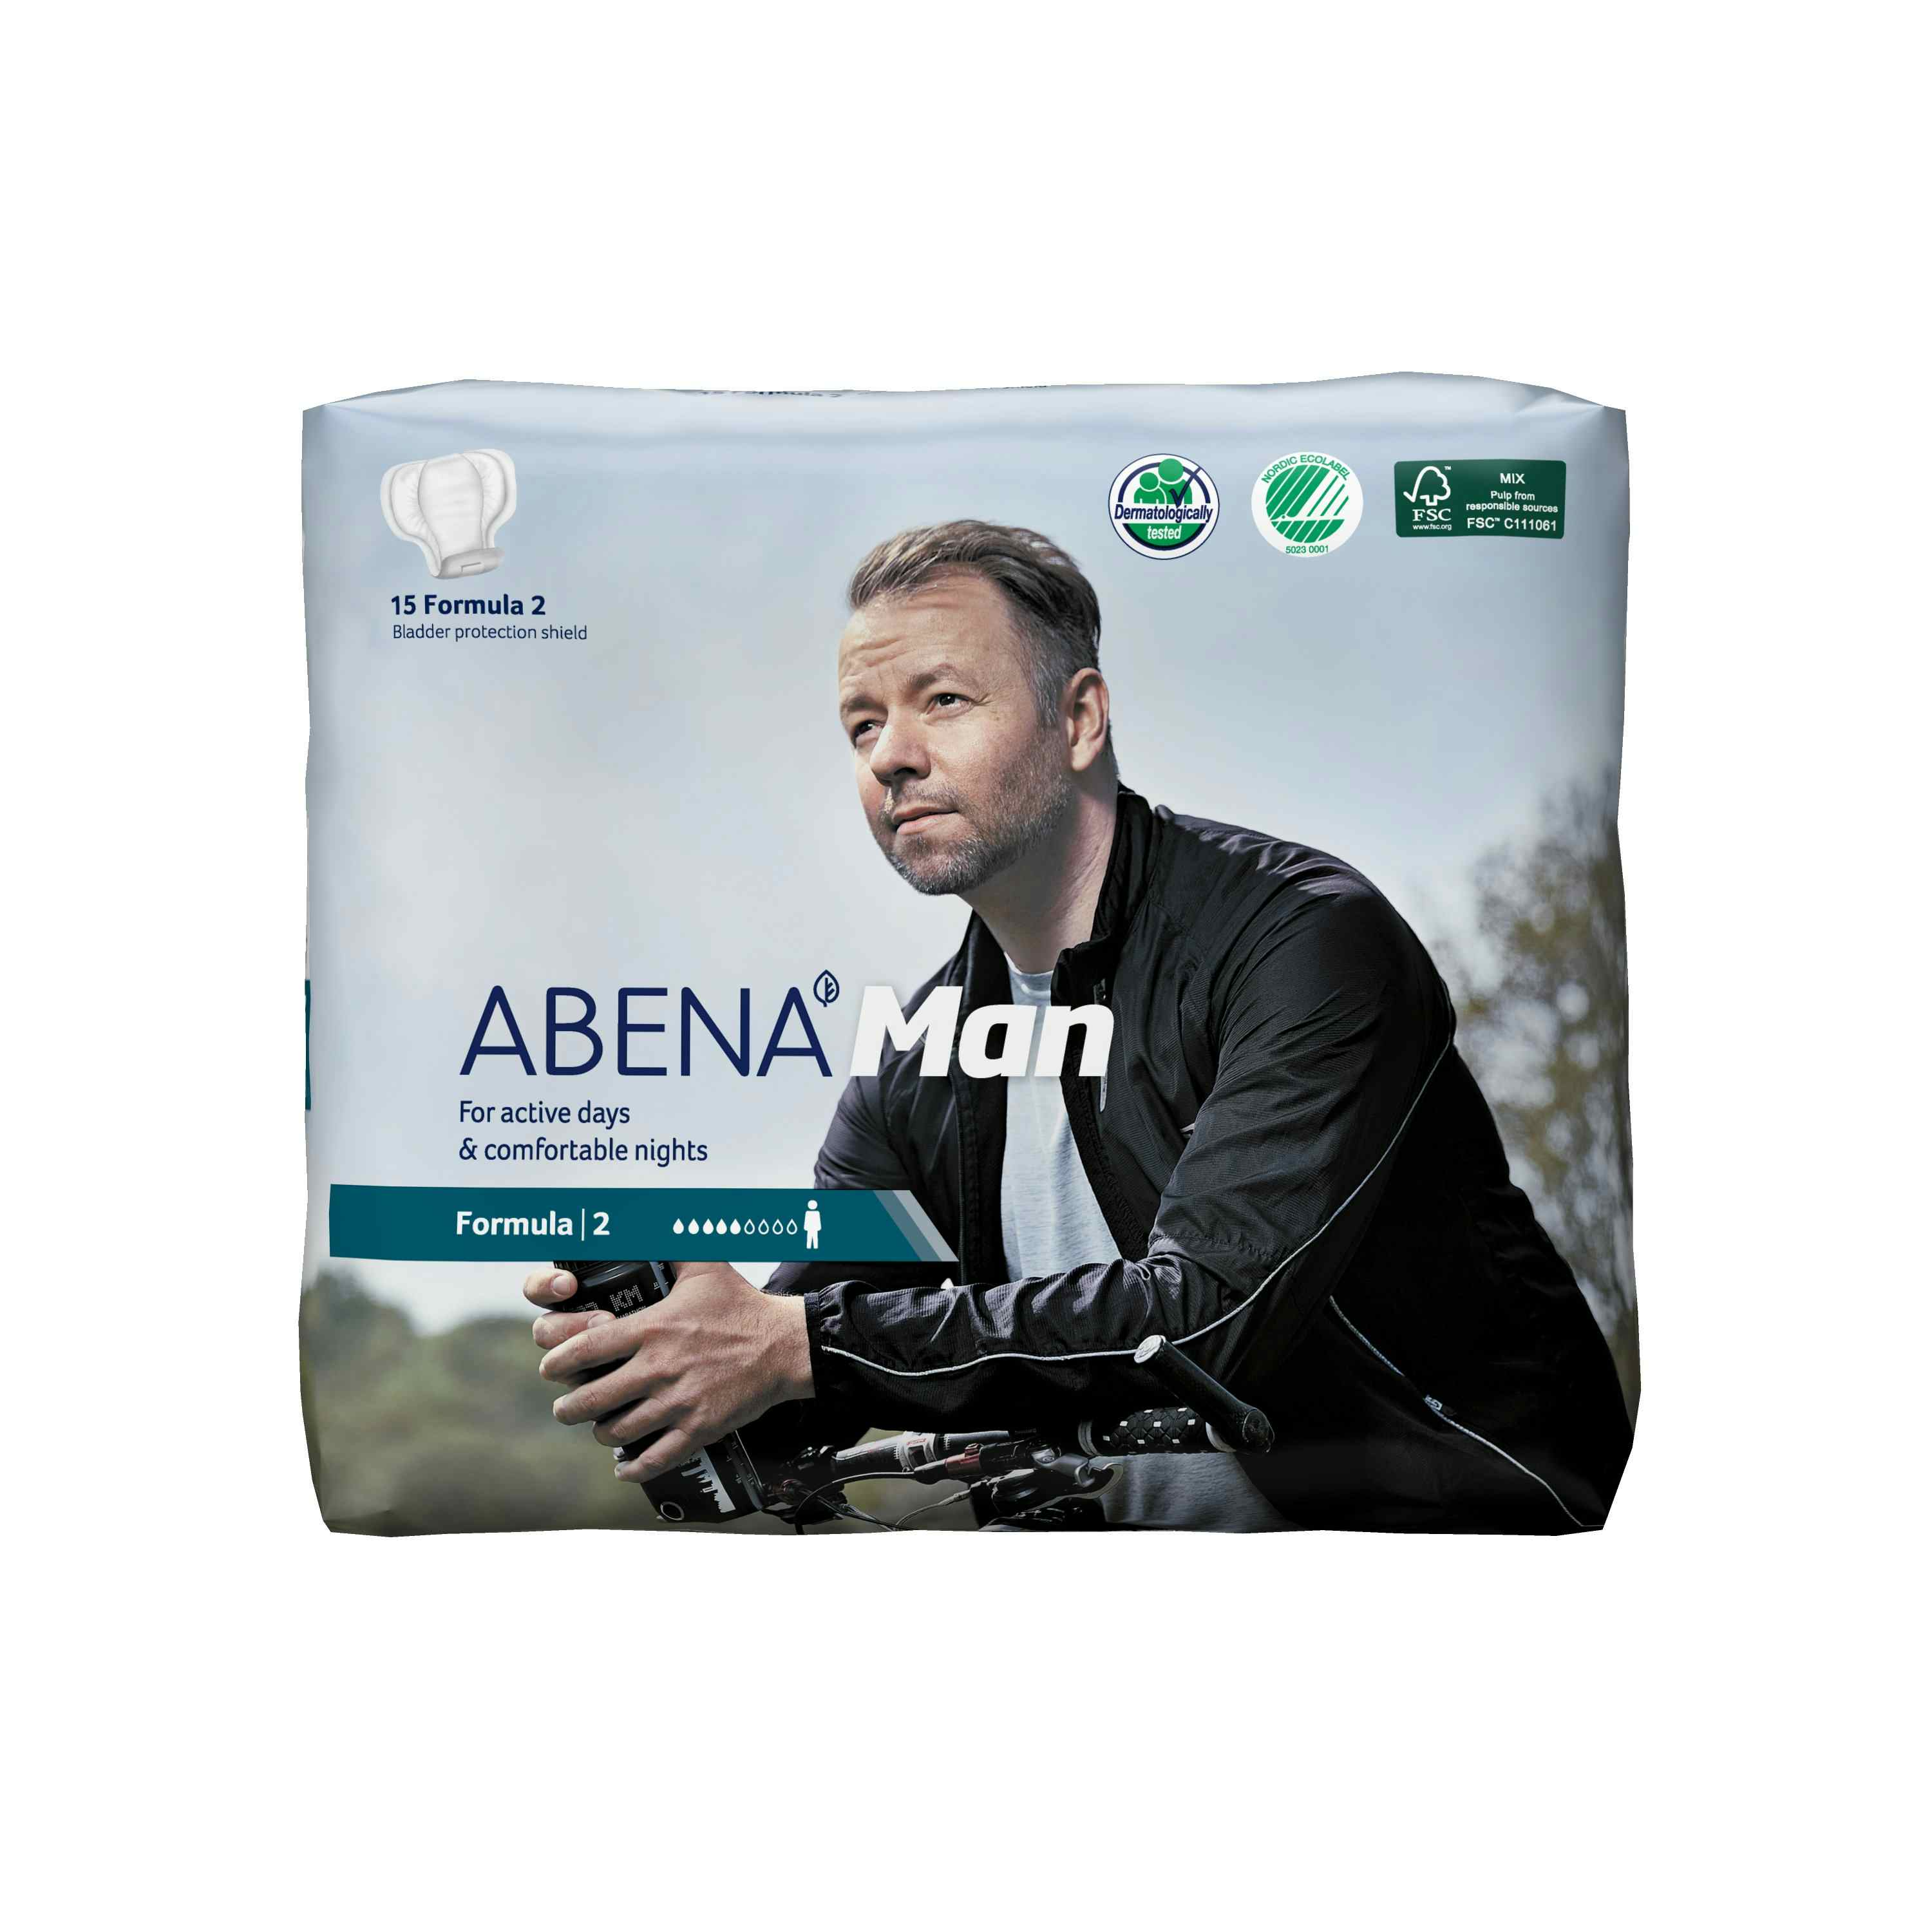  Abena-Man Adult Male Disposable Bladder Control Pad, Light Absorbency, 1000017163, Formula 2 (11") - Case of 180 Pads (12 Bags)